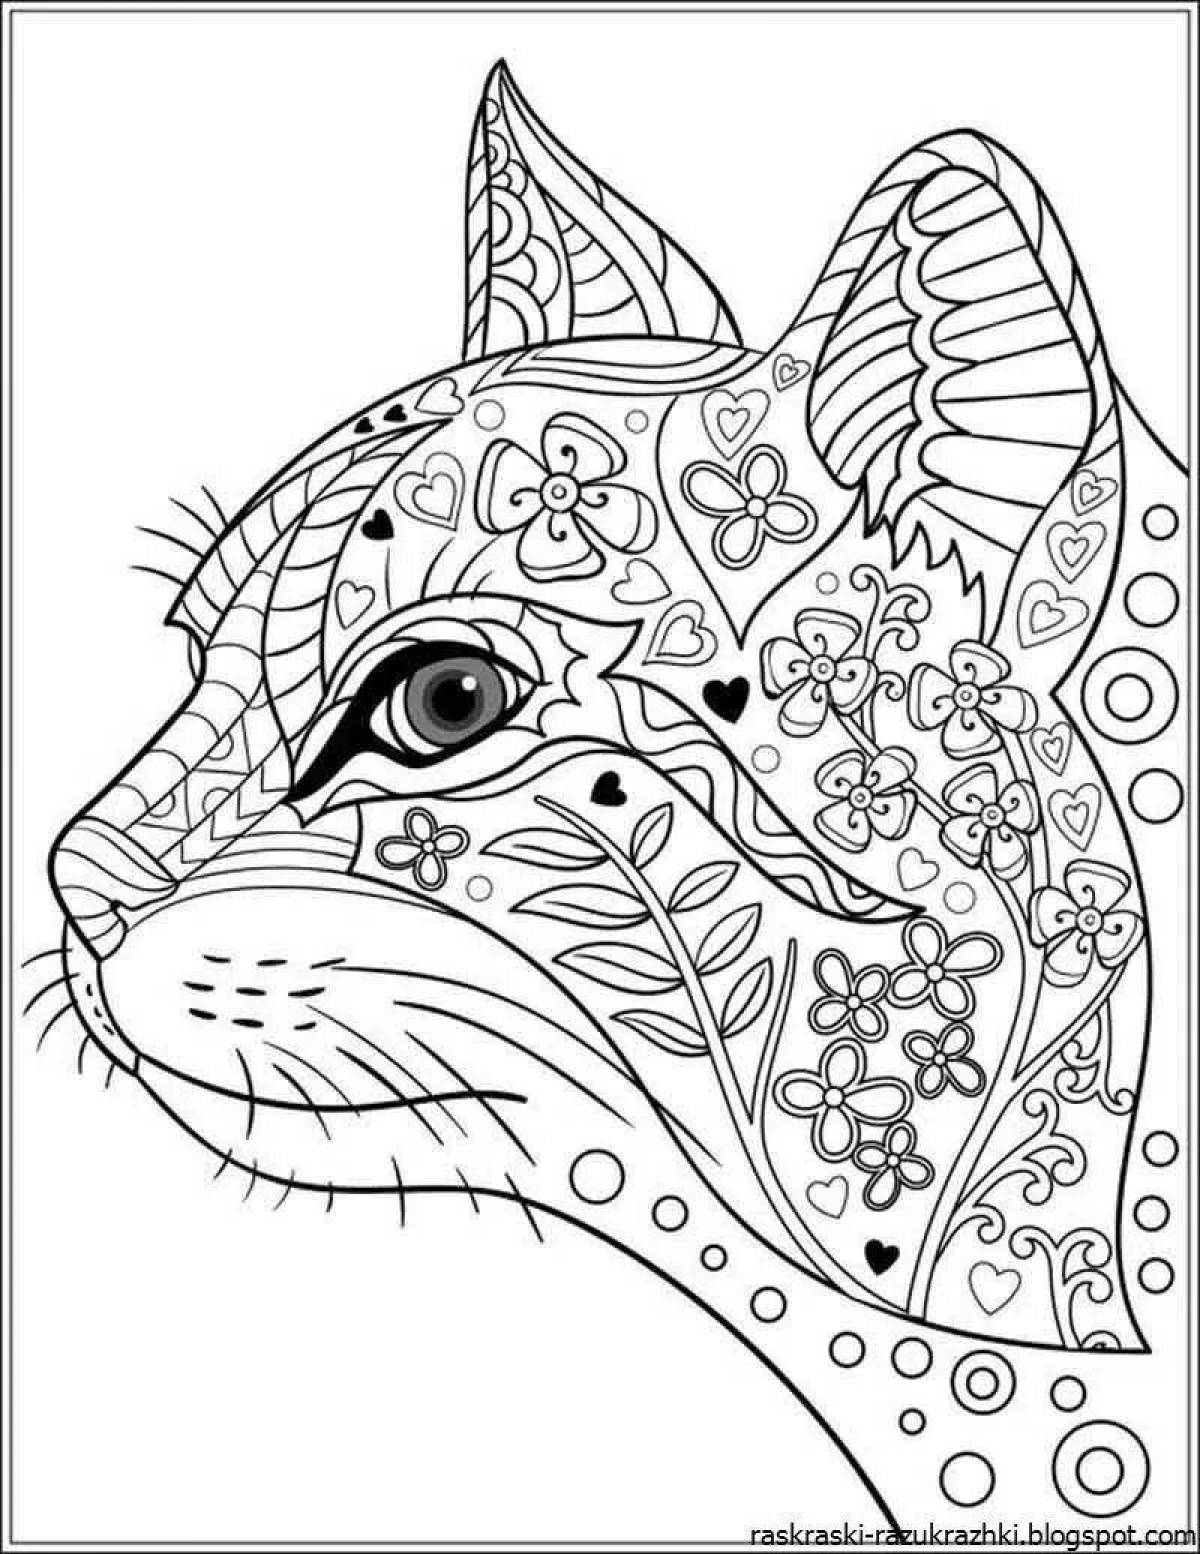 Unique coloring book for girls 11 years old animals